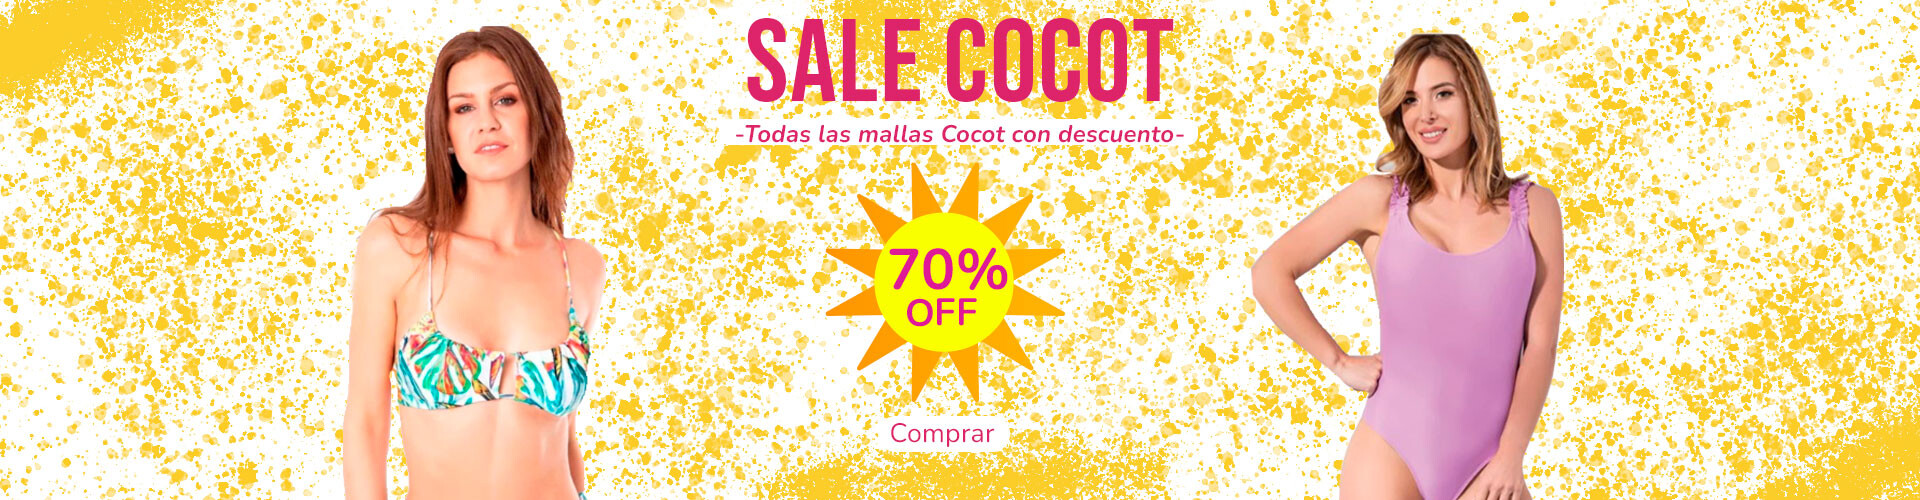 Sale cocot 70%off